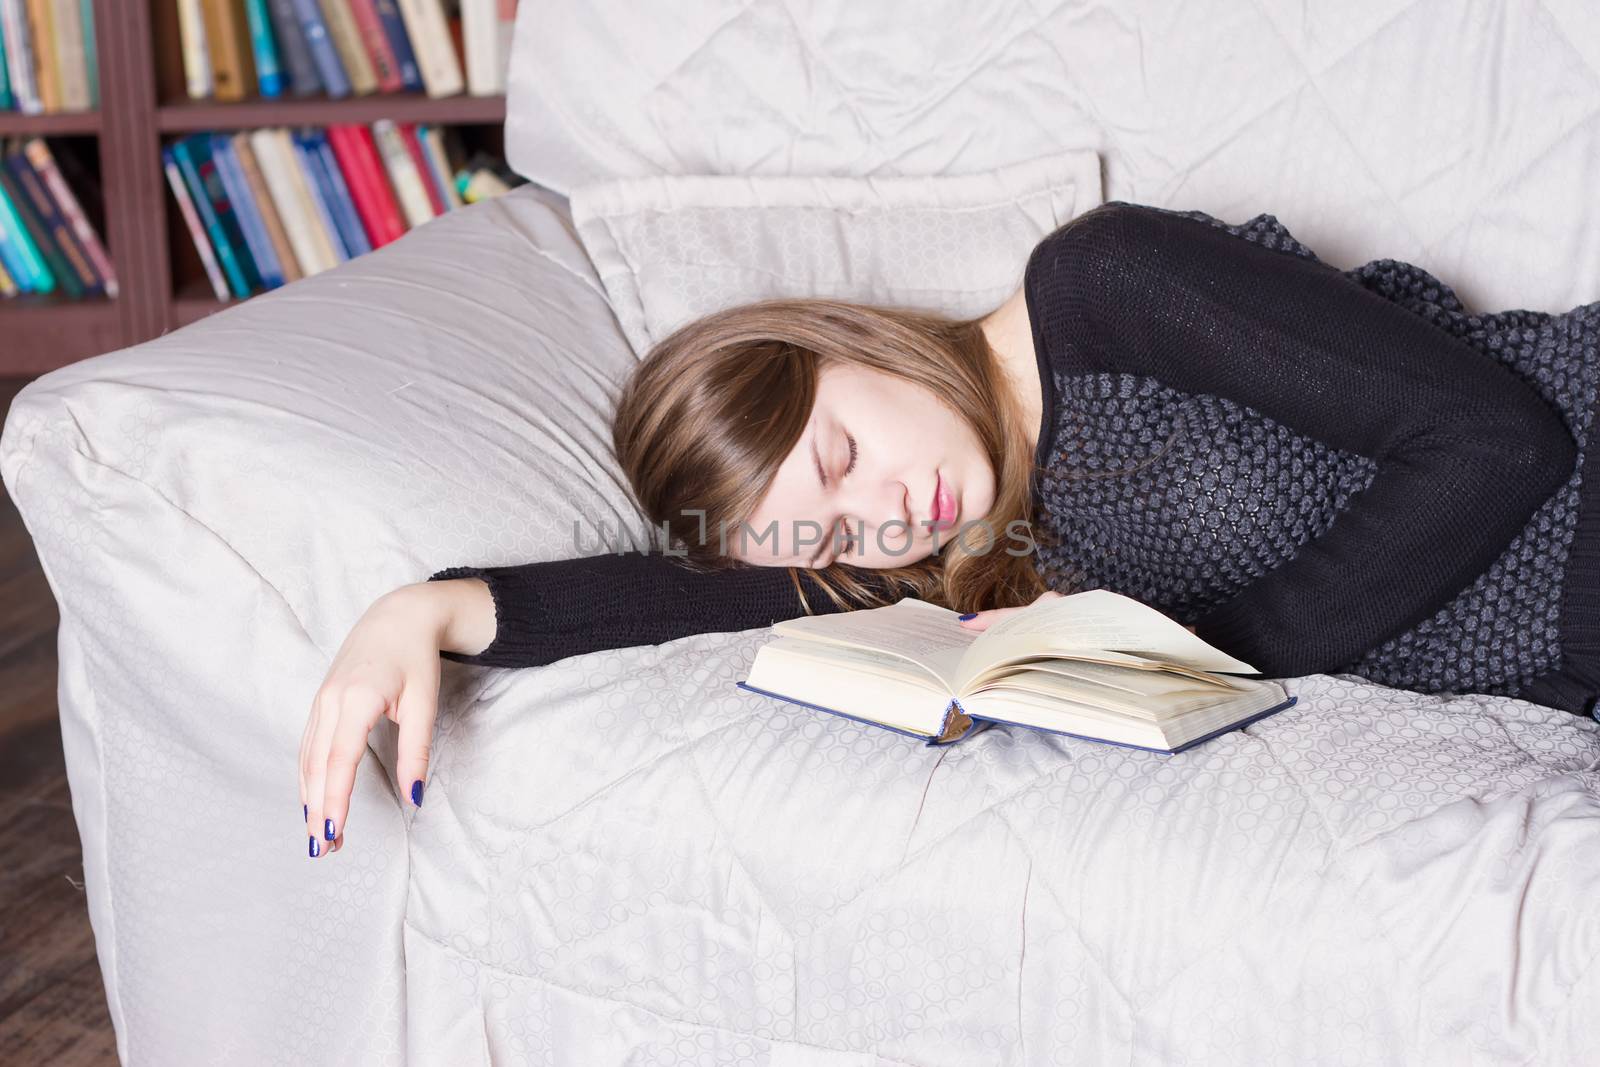 Cute girl sleeping while holding a book lying on her bed